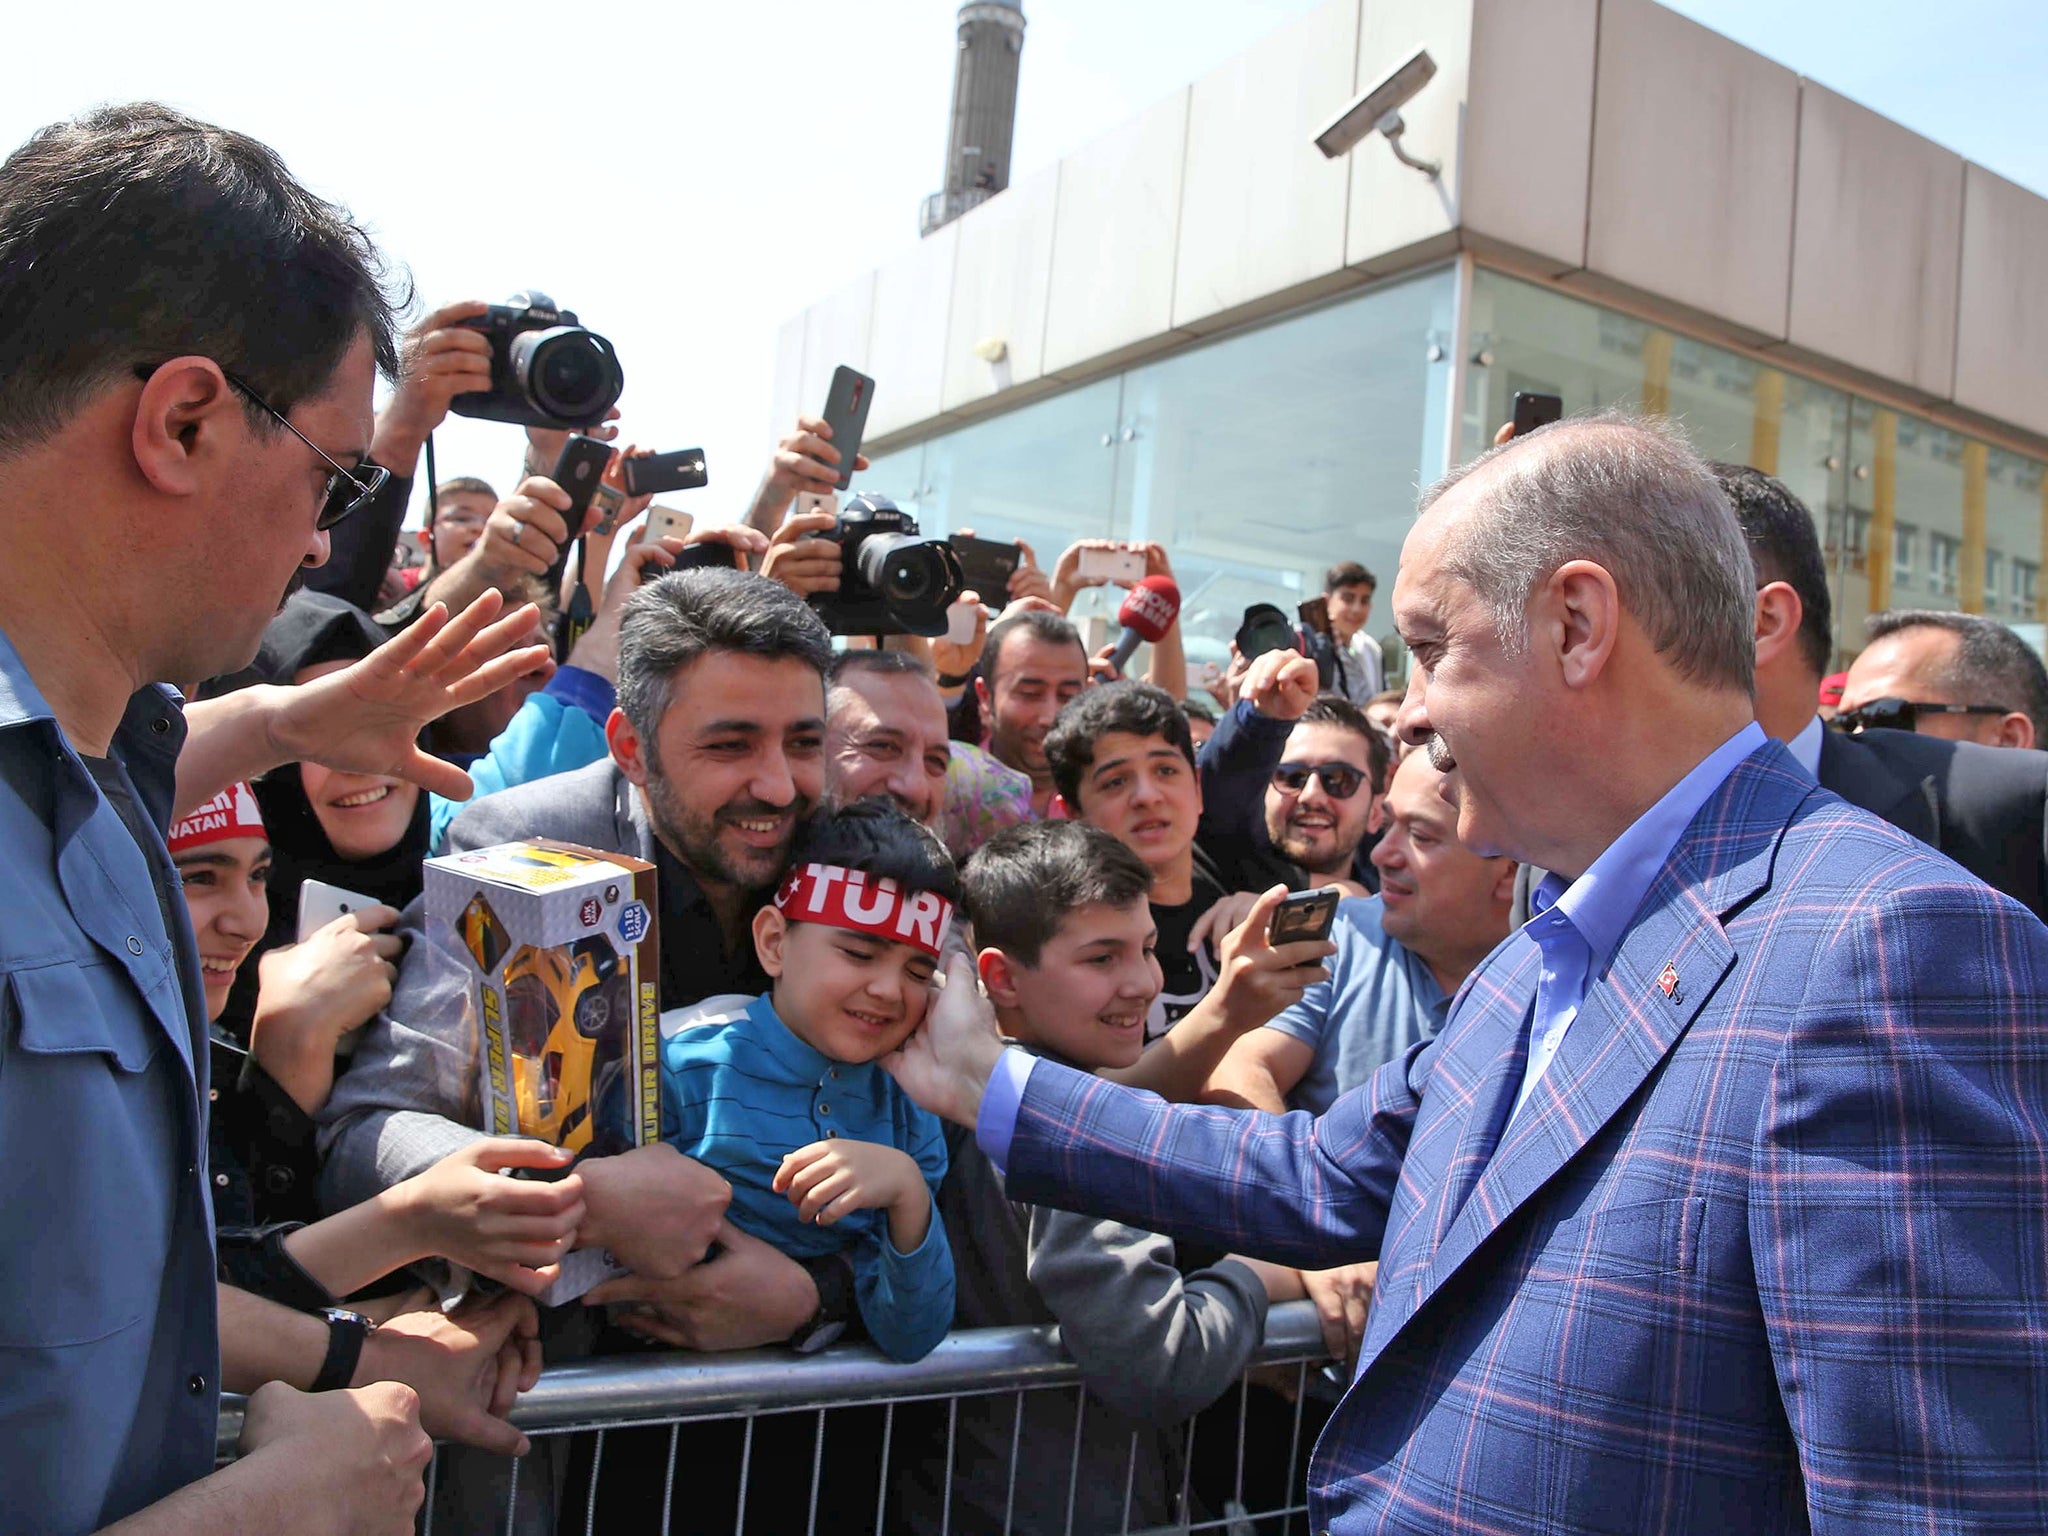 President Erdogan greets supporters outside a polling station. A 'yes' vote would make him immensely powerful